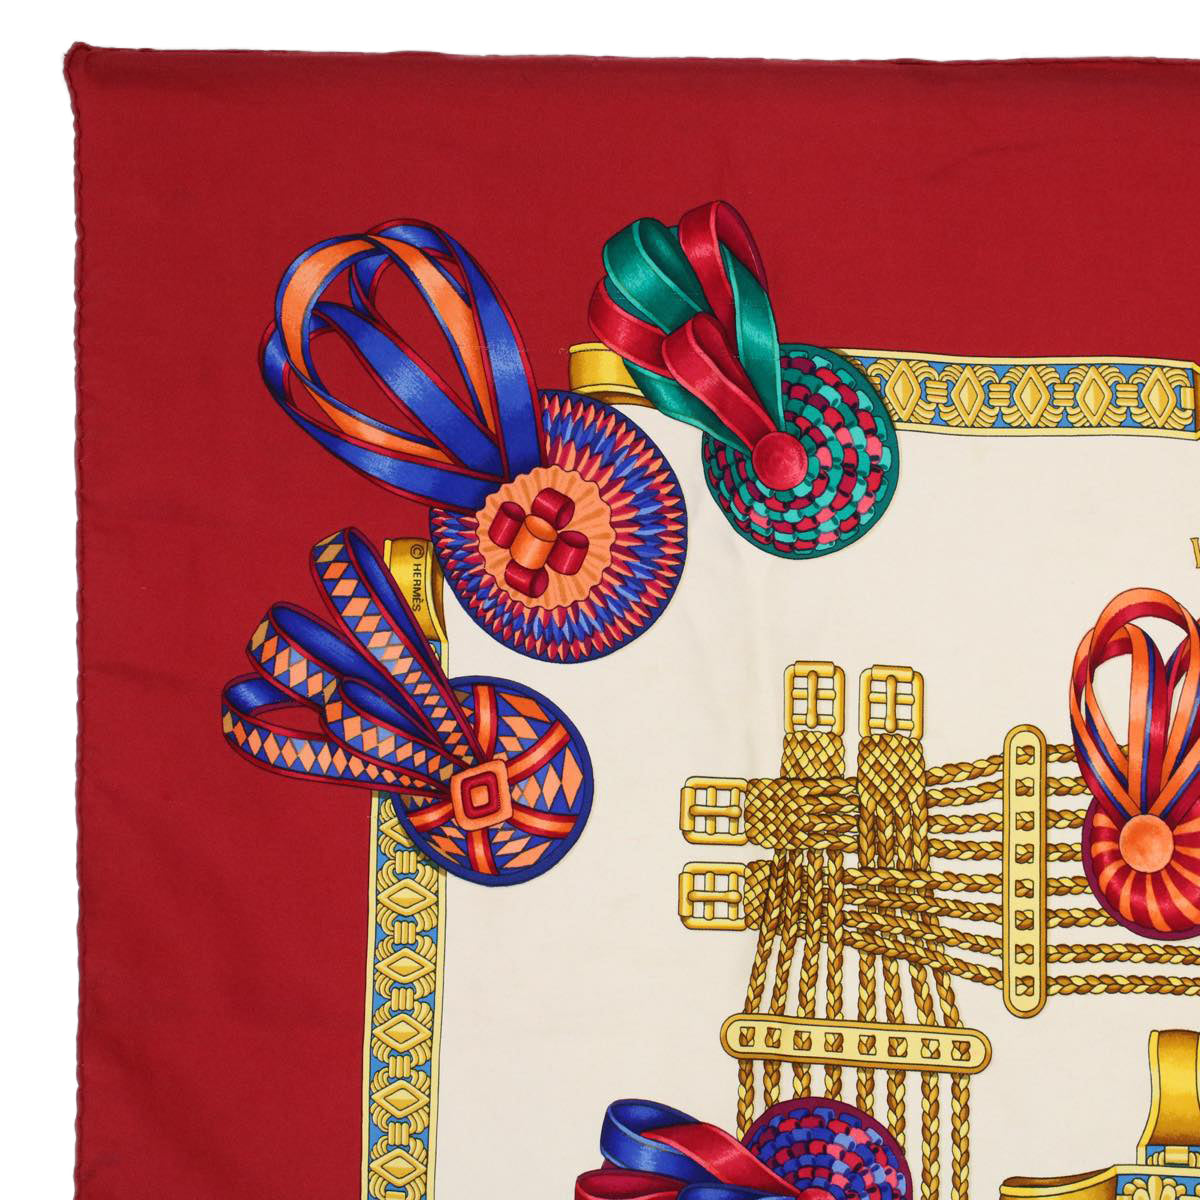 HERMES Carre 90 Les ruban du cheval Scarf Silk Red Auth 56338